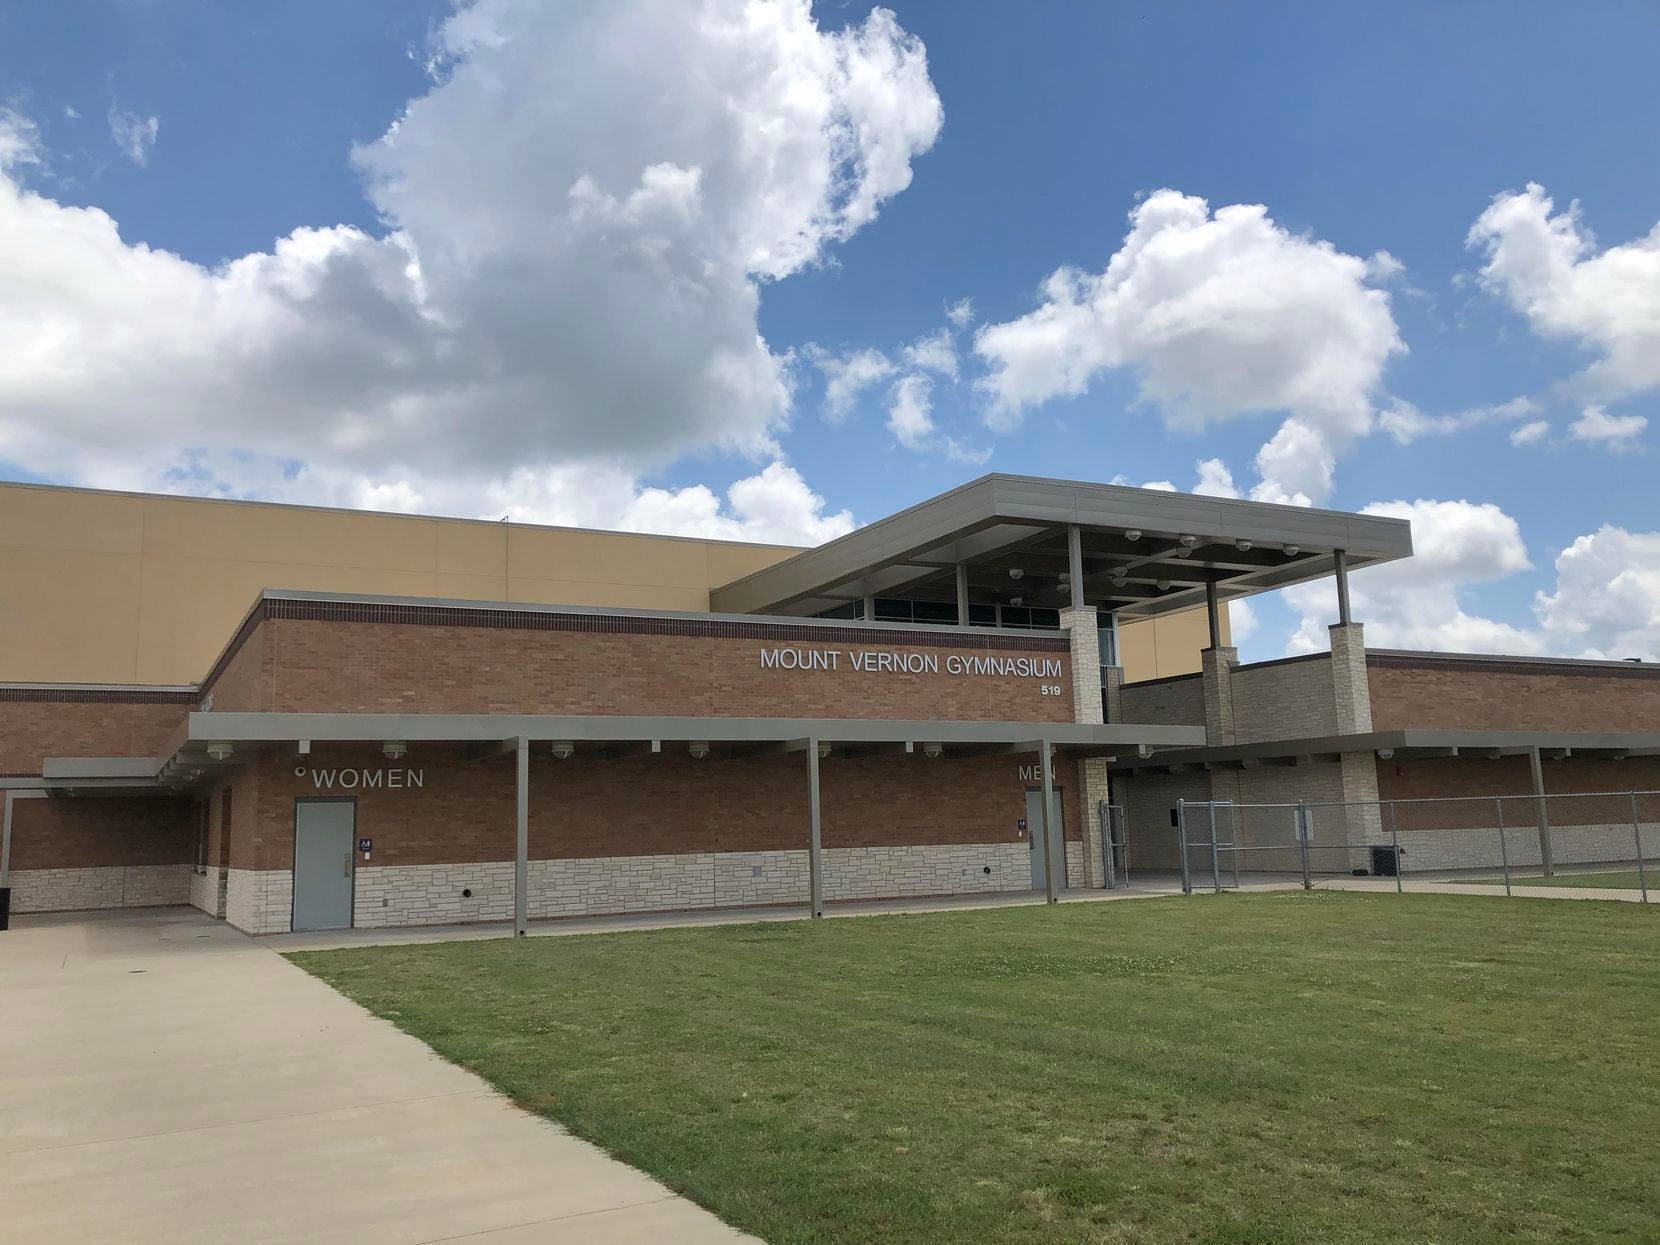 Mount Vernon, TX - Outside of Mount Vernon High School on Saturday, May 25. 2019